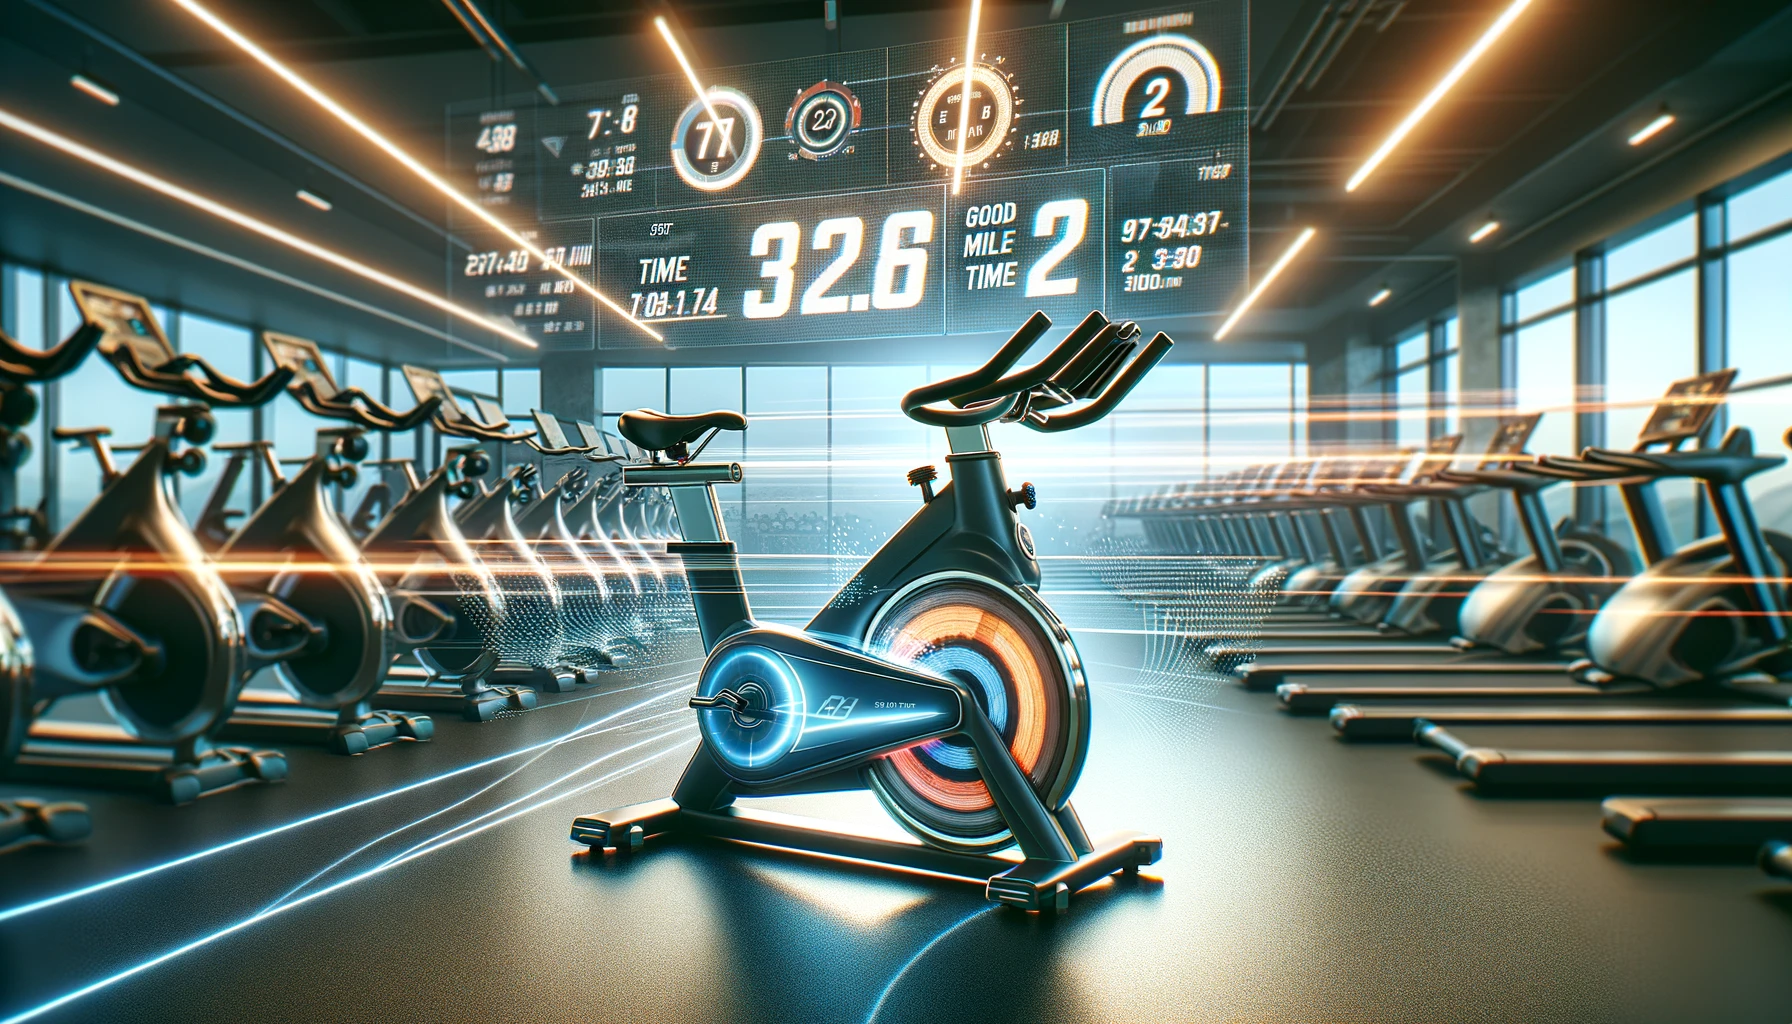 What is a Good Mile Time on a Stationary Bike?